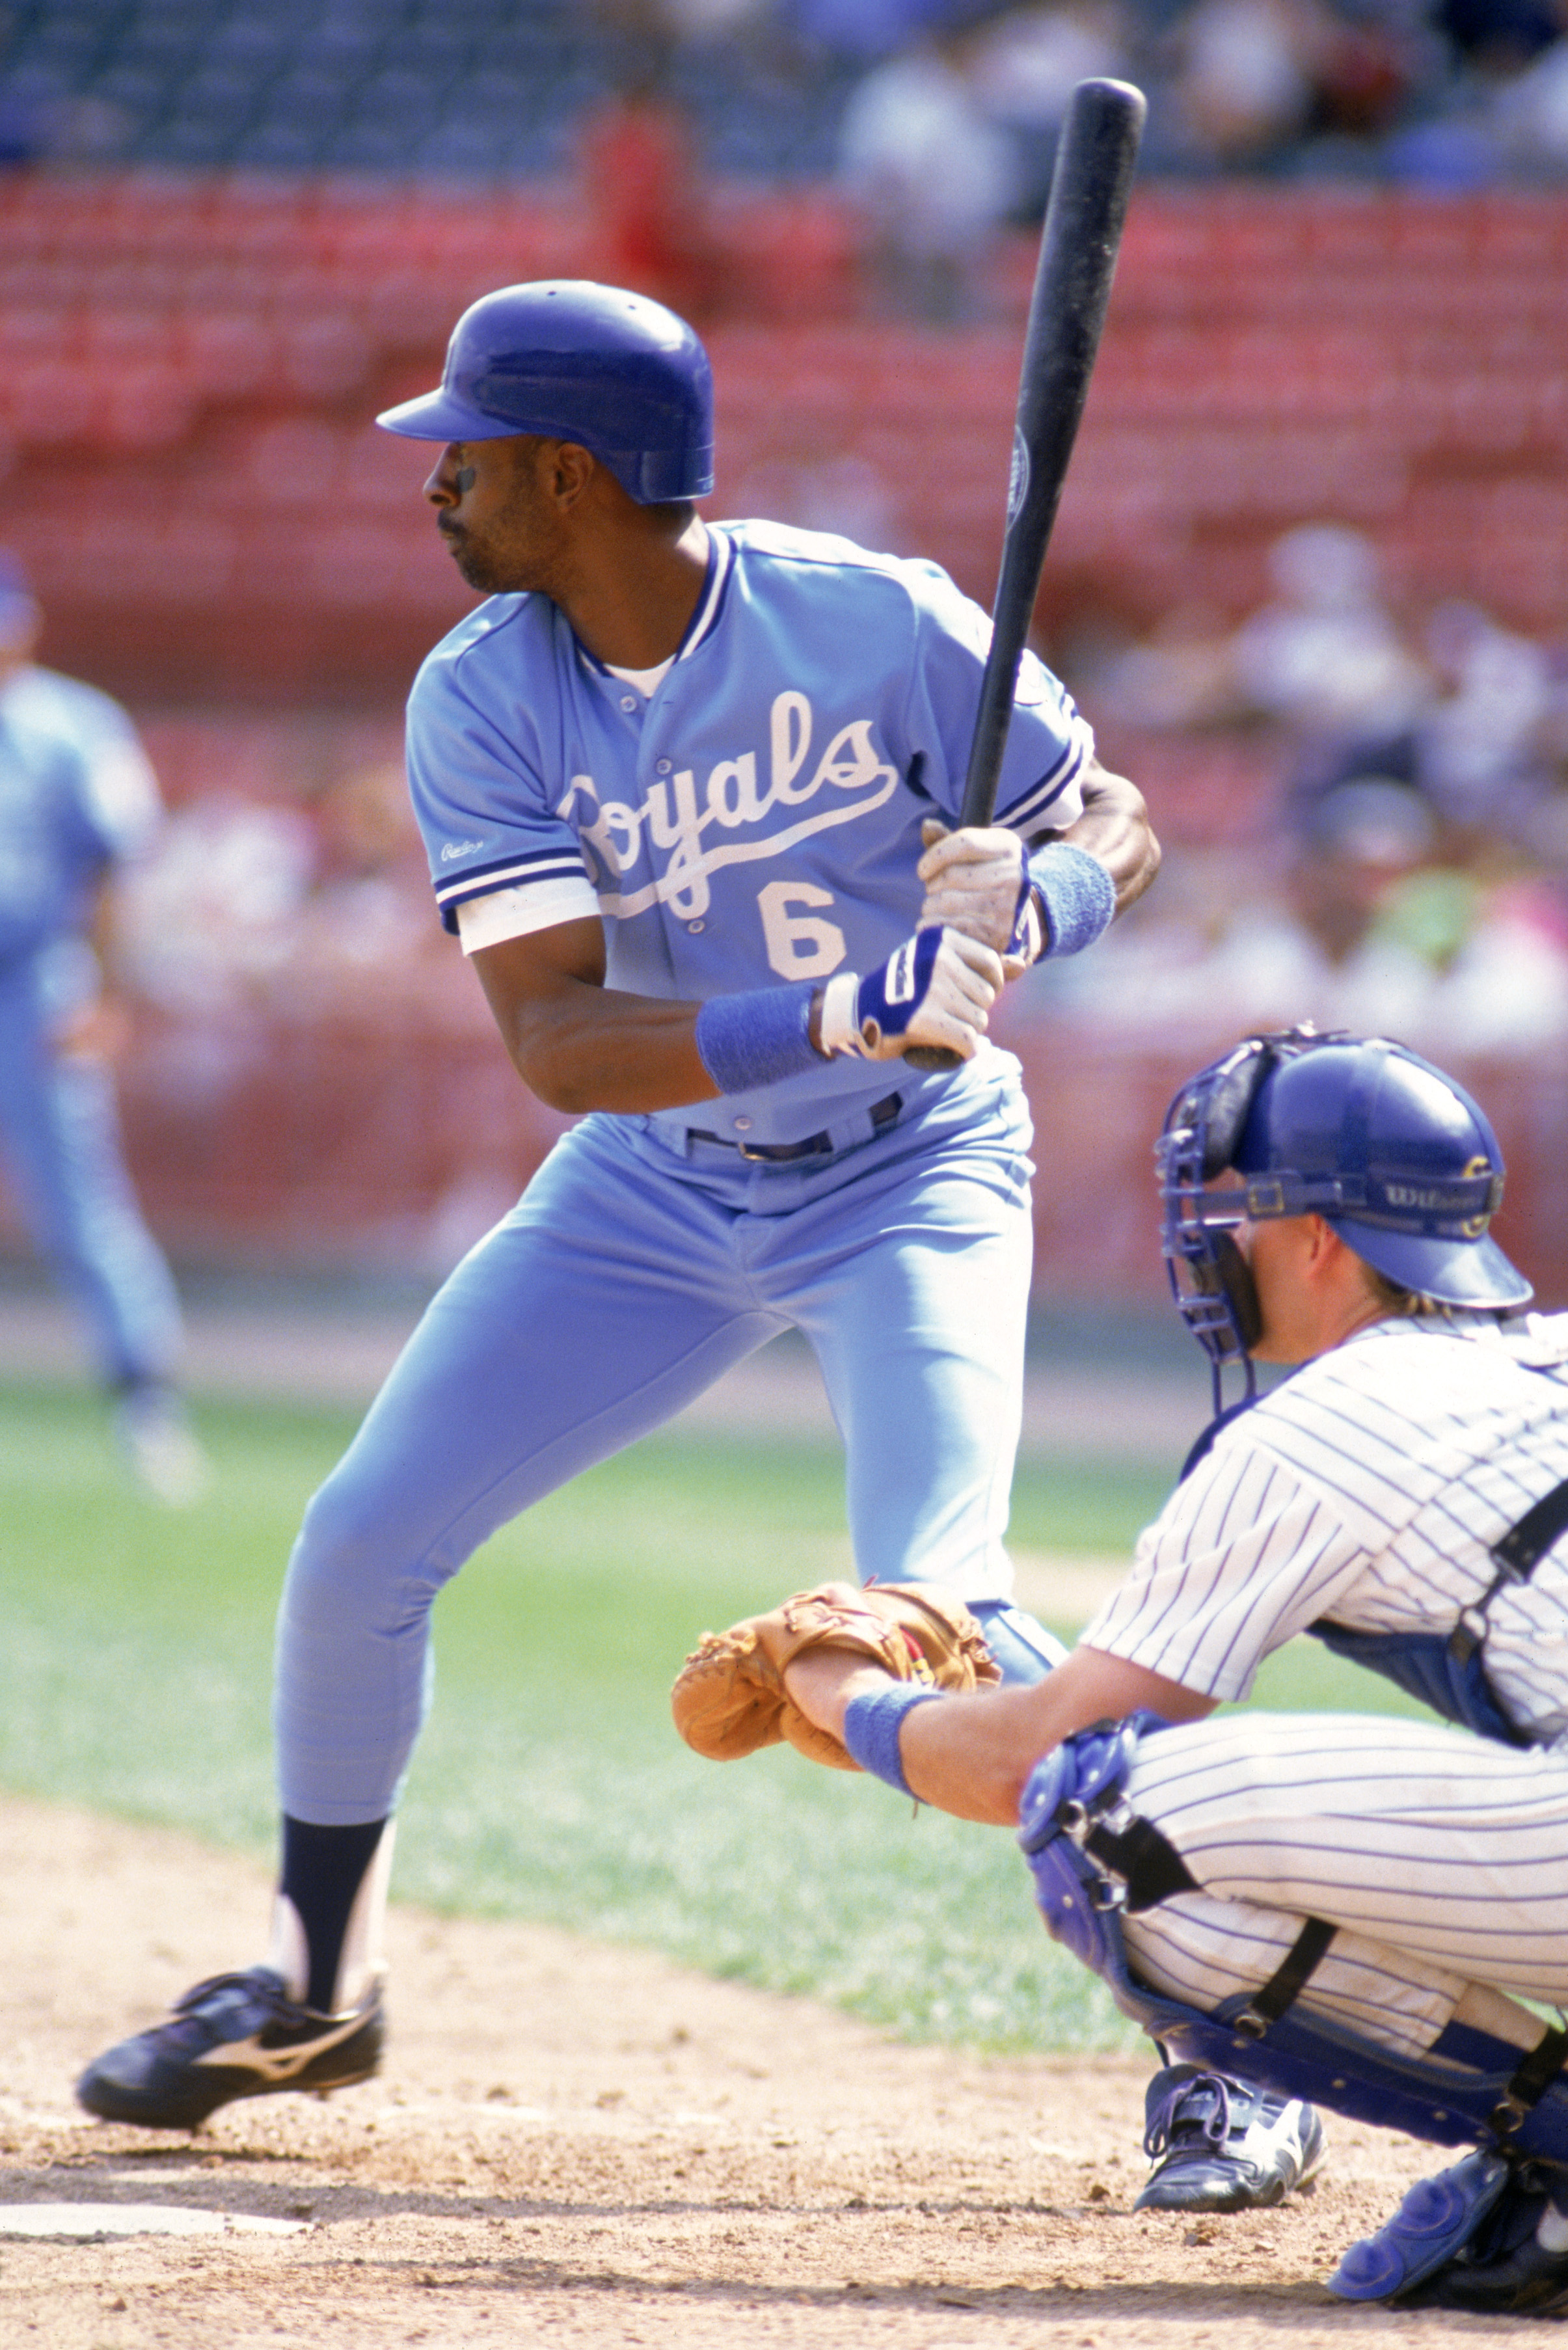 Best Royals Players By Jersey Number: 46-91